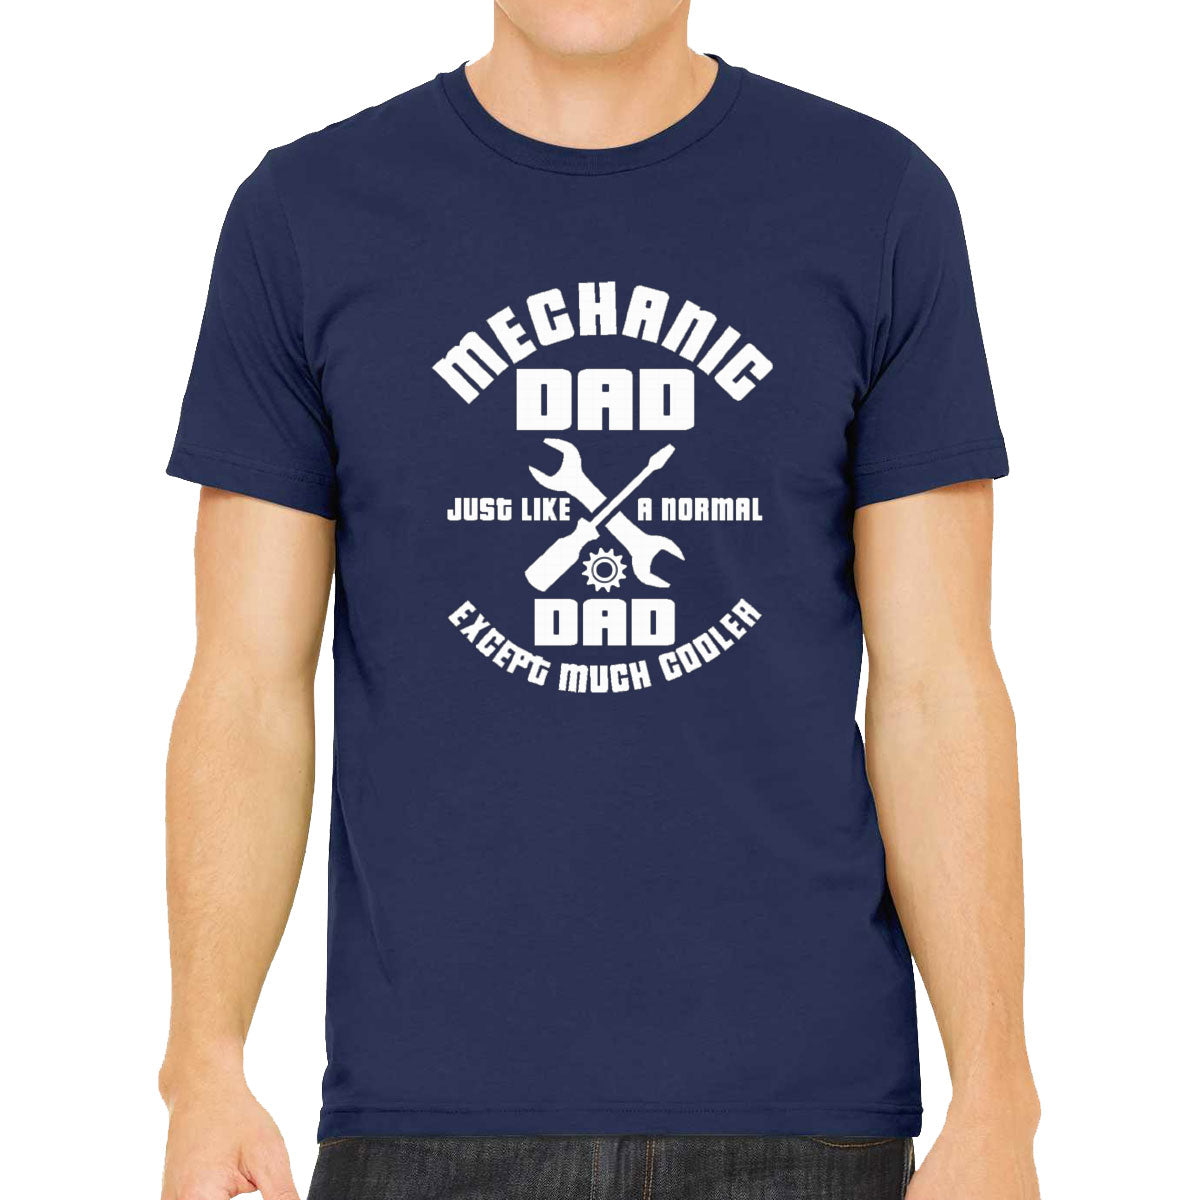 Mechanic Dad Just Like A Normal Dad Except Much Cooler Men's T-shirt